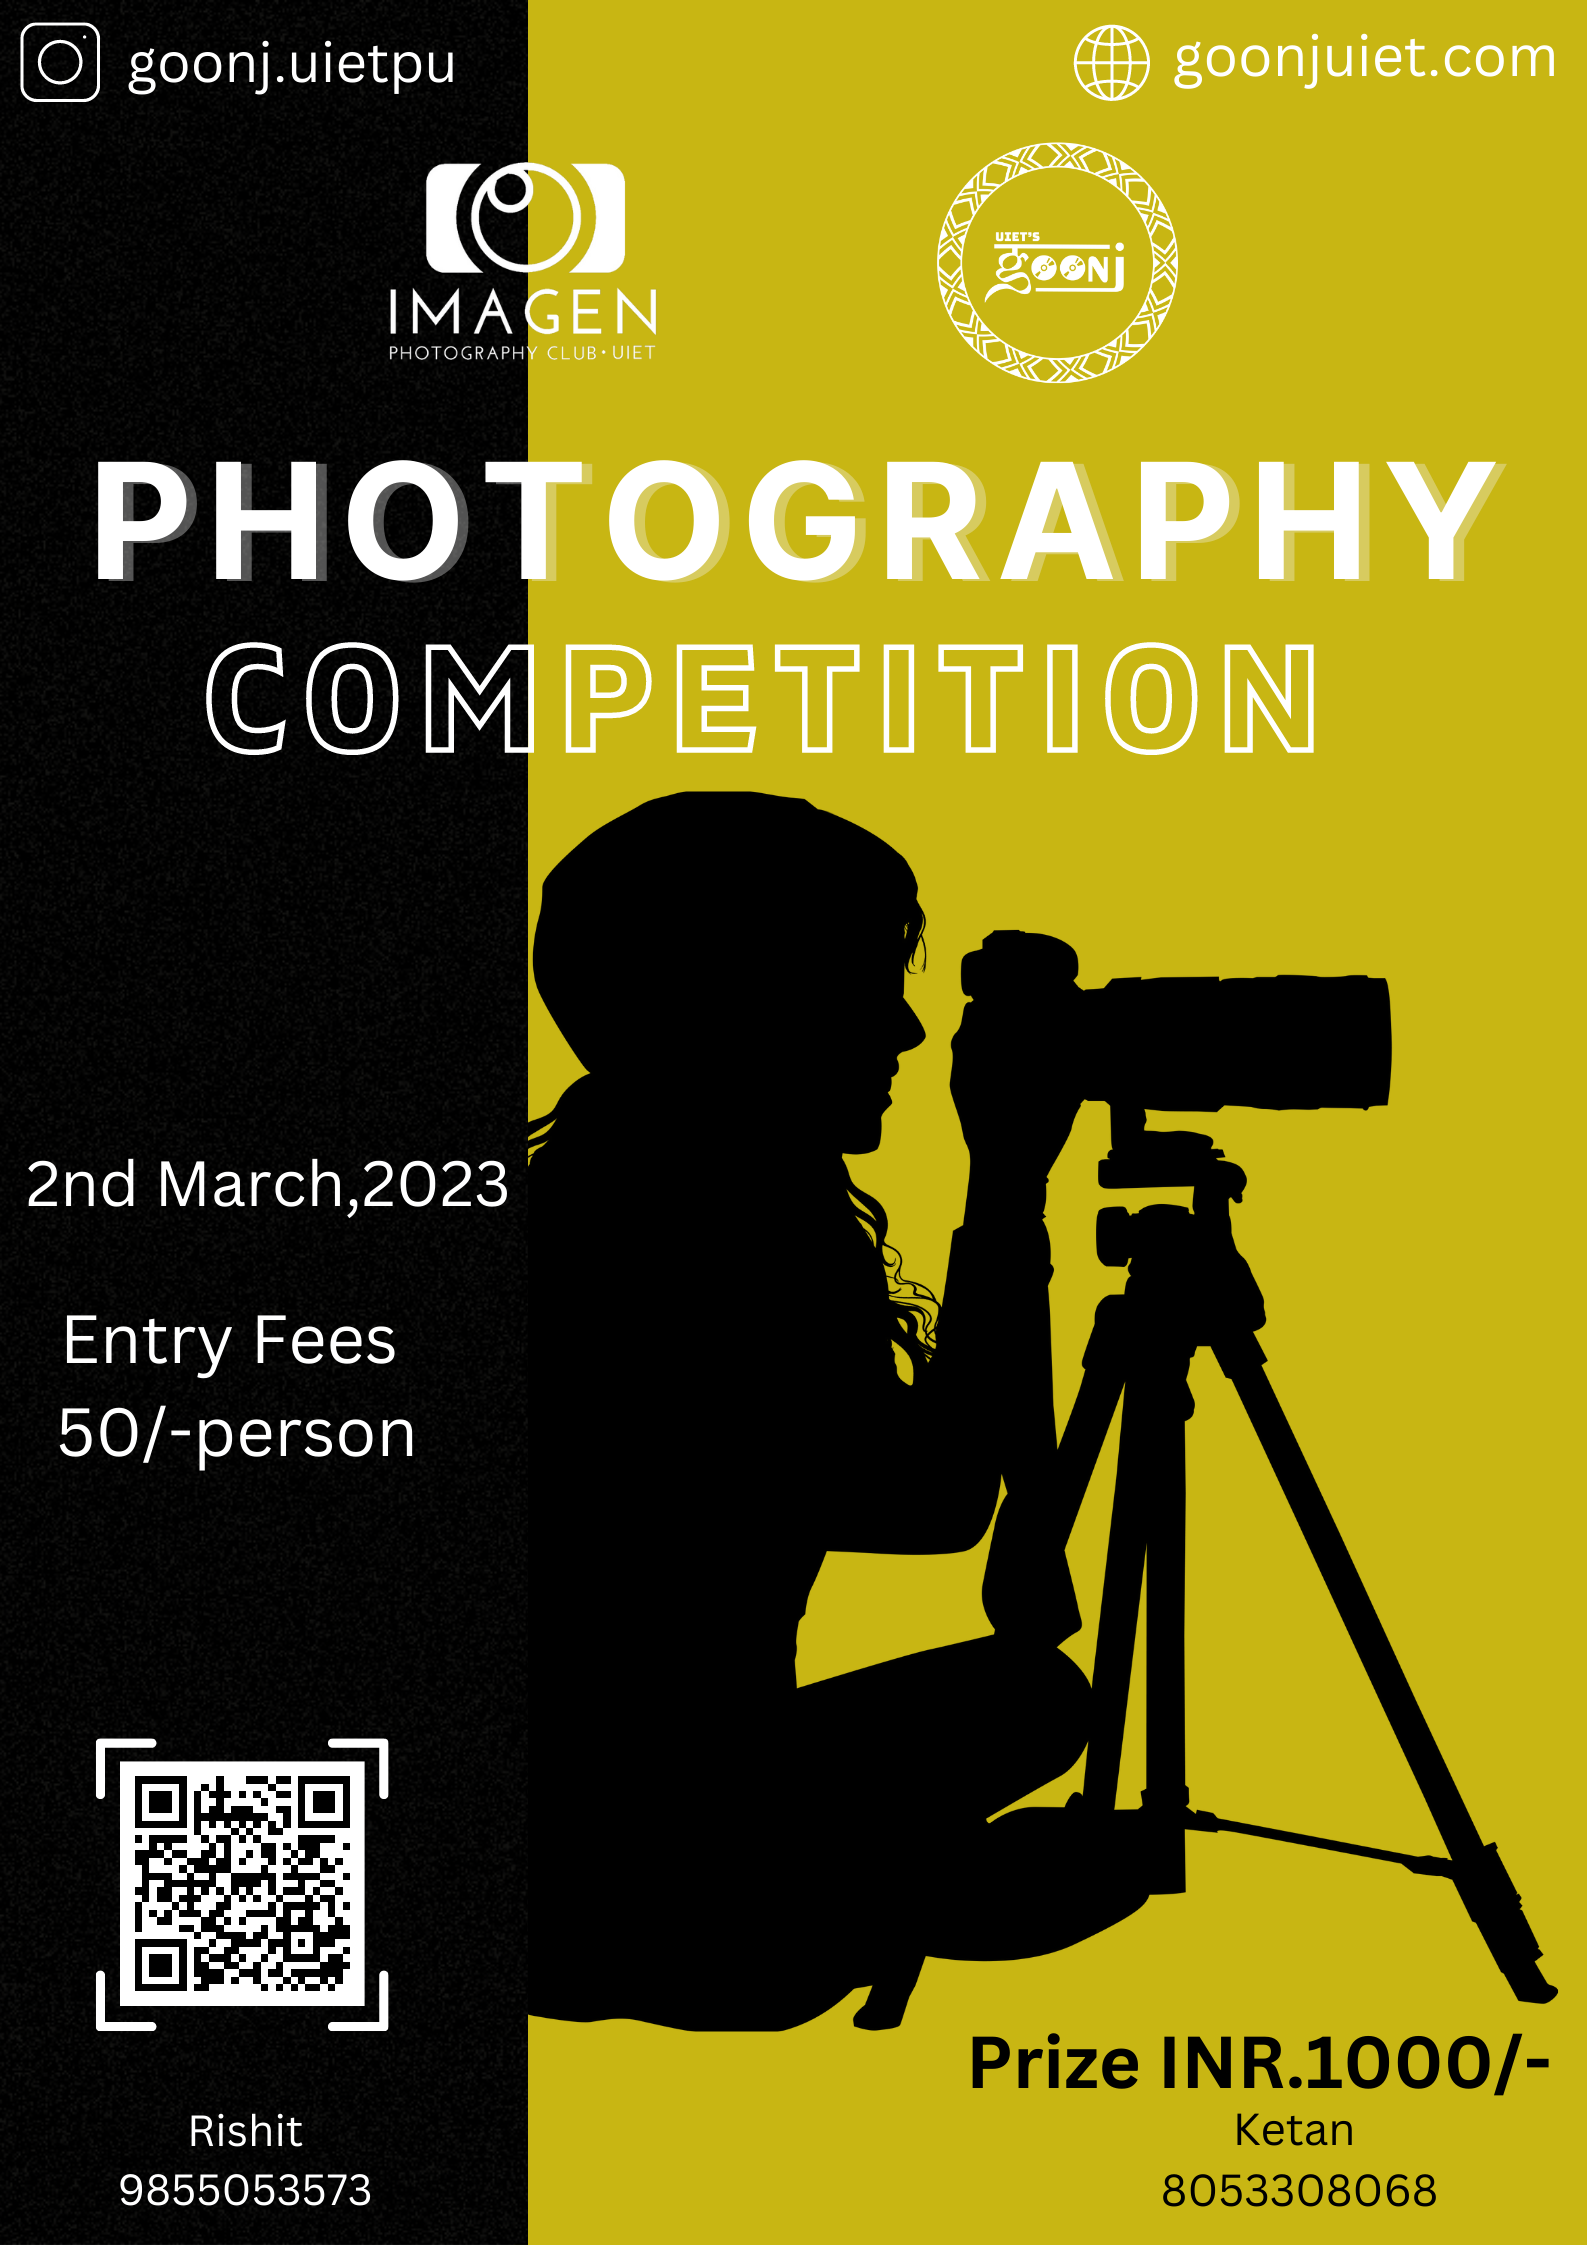 PHOTOGRAPHY COMPETITION